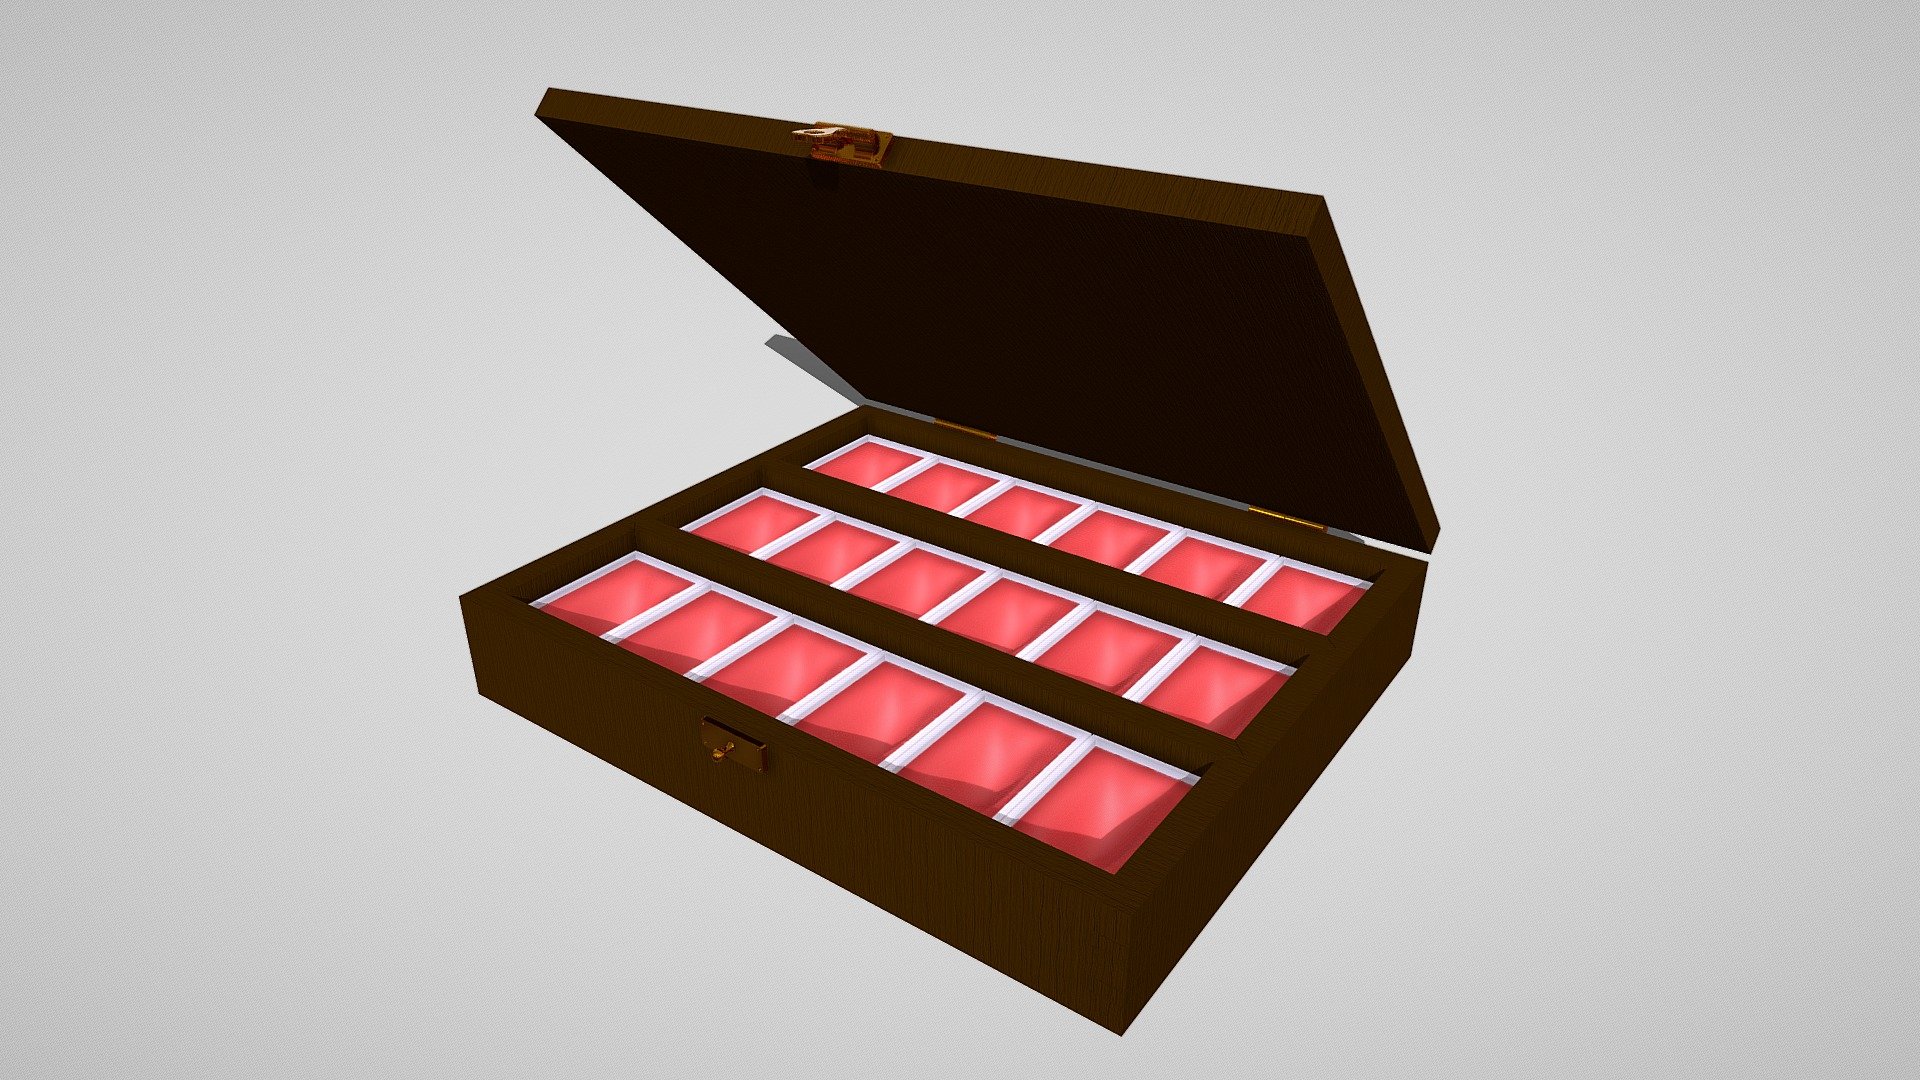 Fully customizable  watercolor Pallett wooden box.
Cantact me 3d model